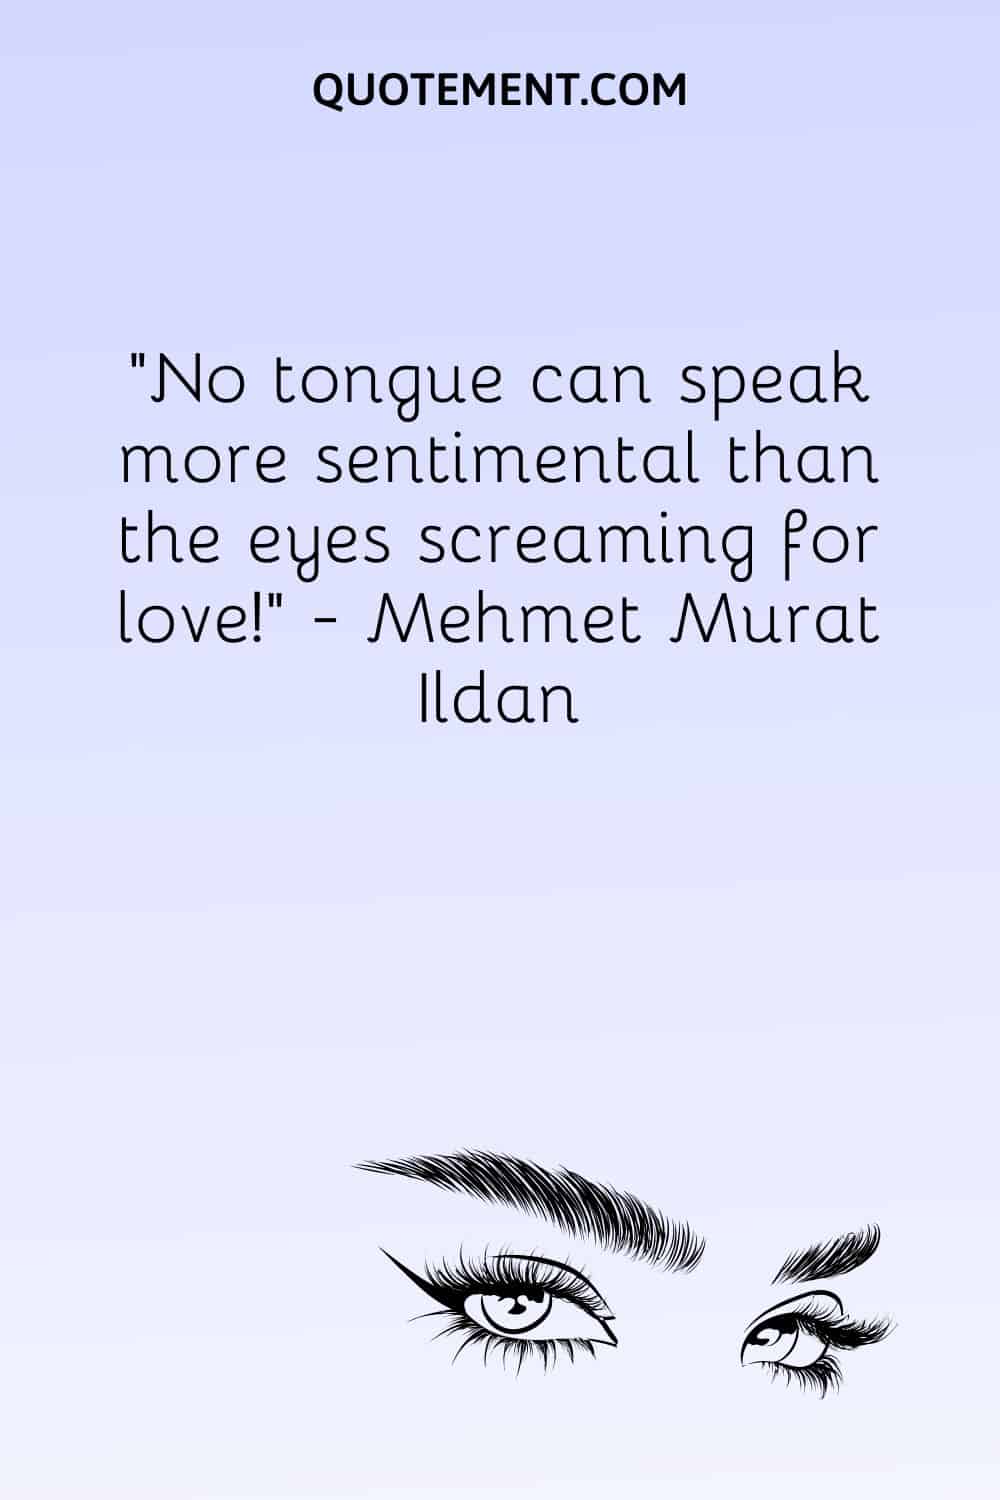 No tongue can speak more sentimental than the eyes screaming for love